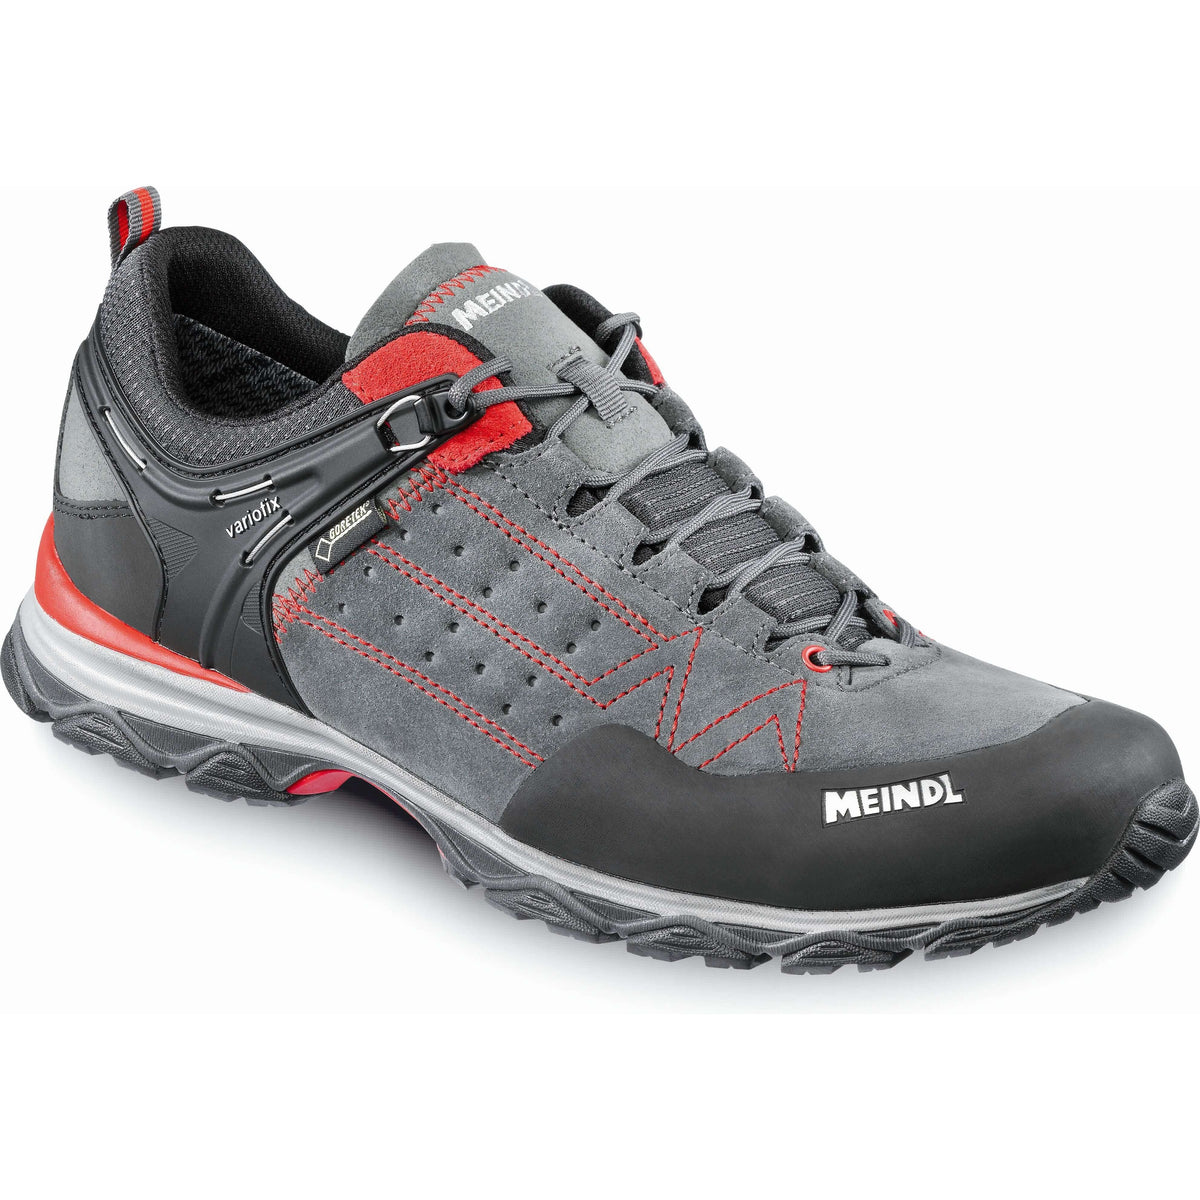 Meindl Ontario GTX Walking Shoes - Red/Anthracite